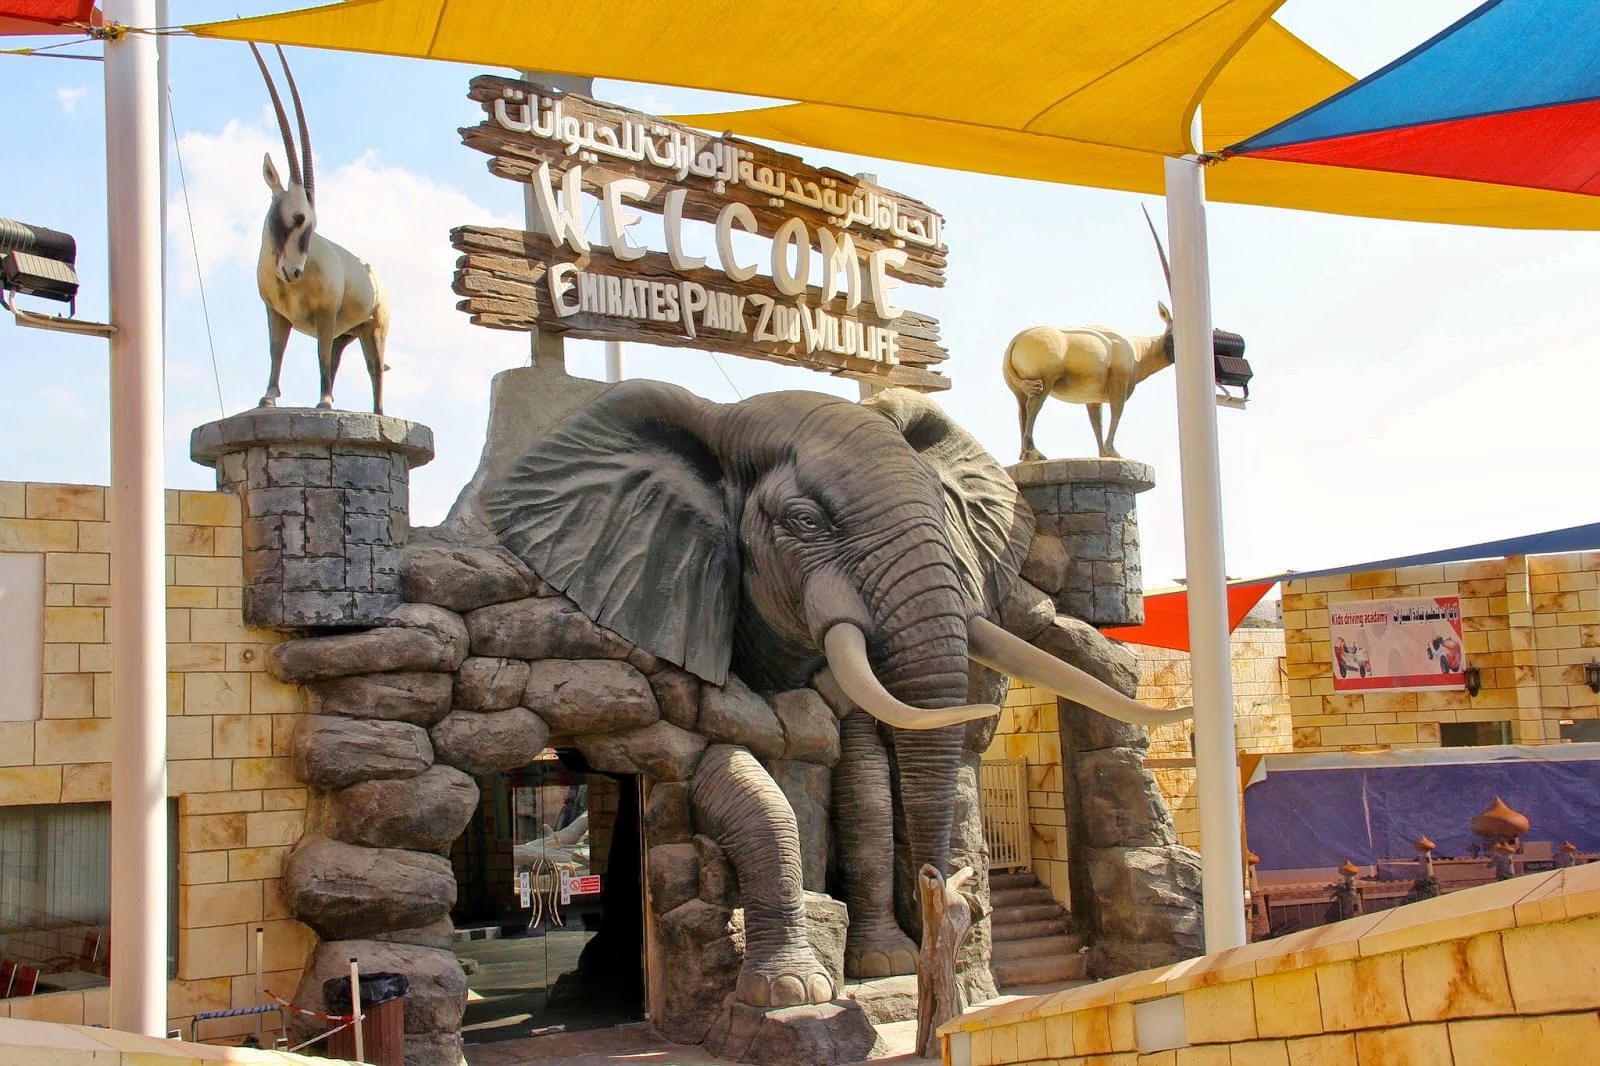 Emirates Park Zoo Overview